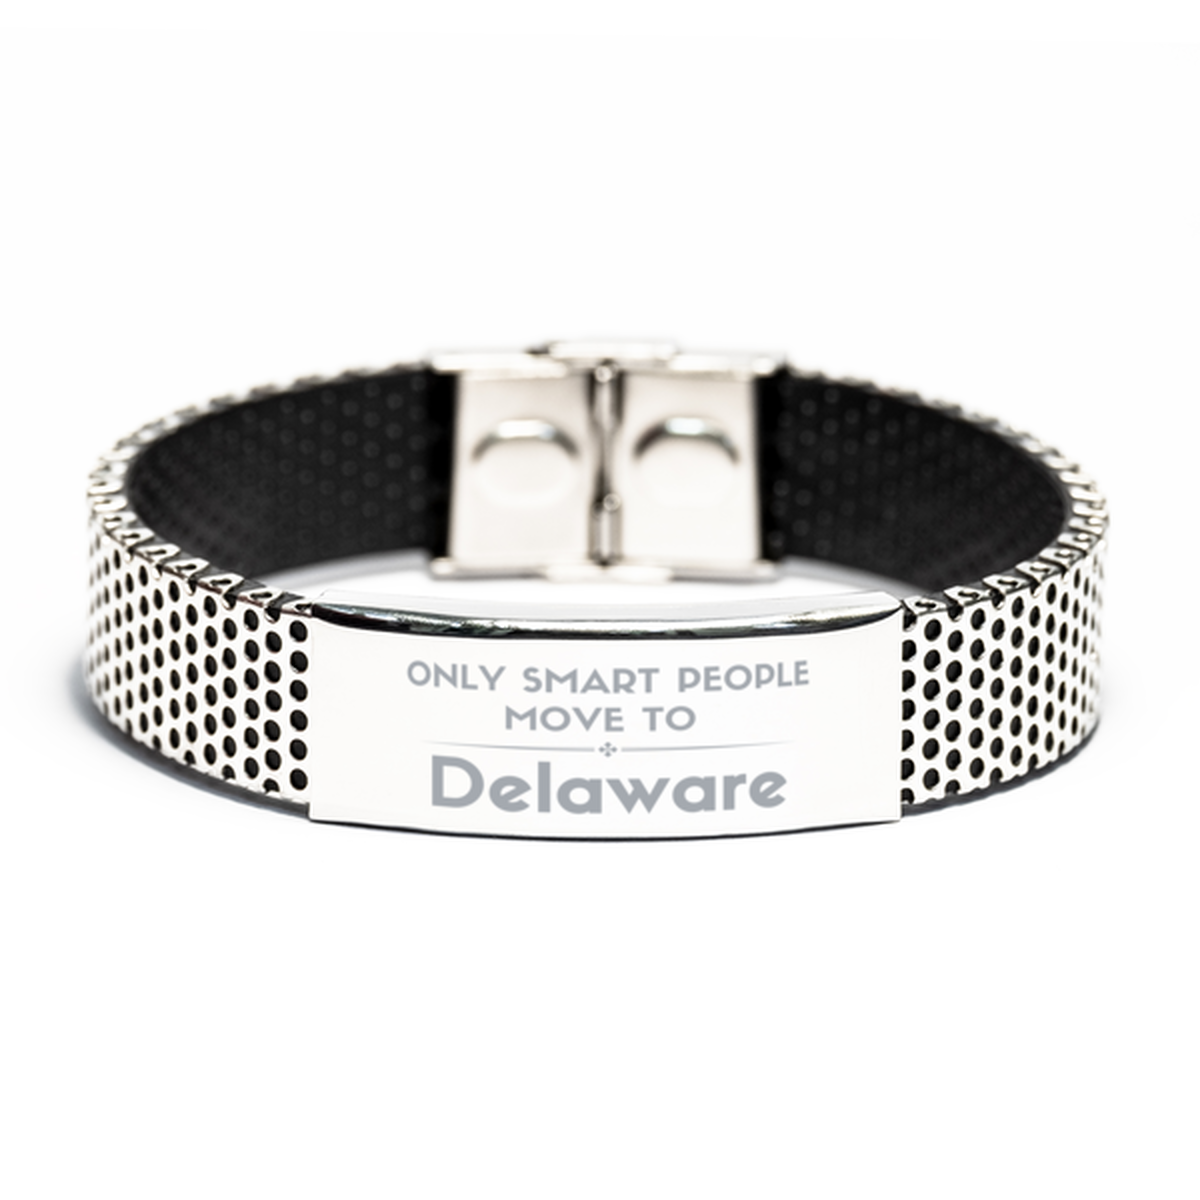 Only smart people move to Delaware Stainless Steel Bracelet, Gag Gifts For Delaware, Move to Delaware Gifts for Friends Coworker Funny Saying Quote